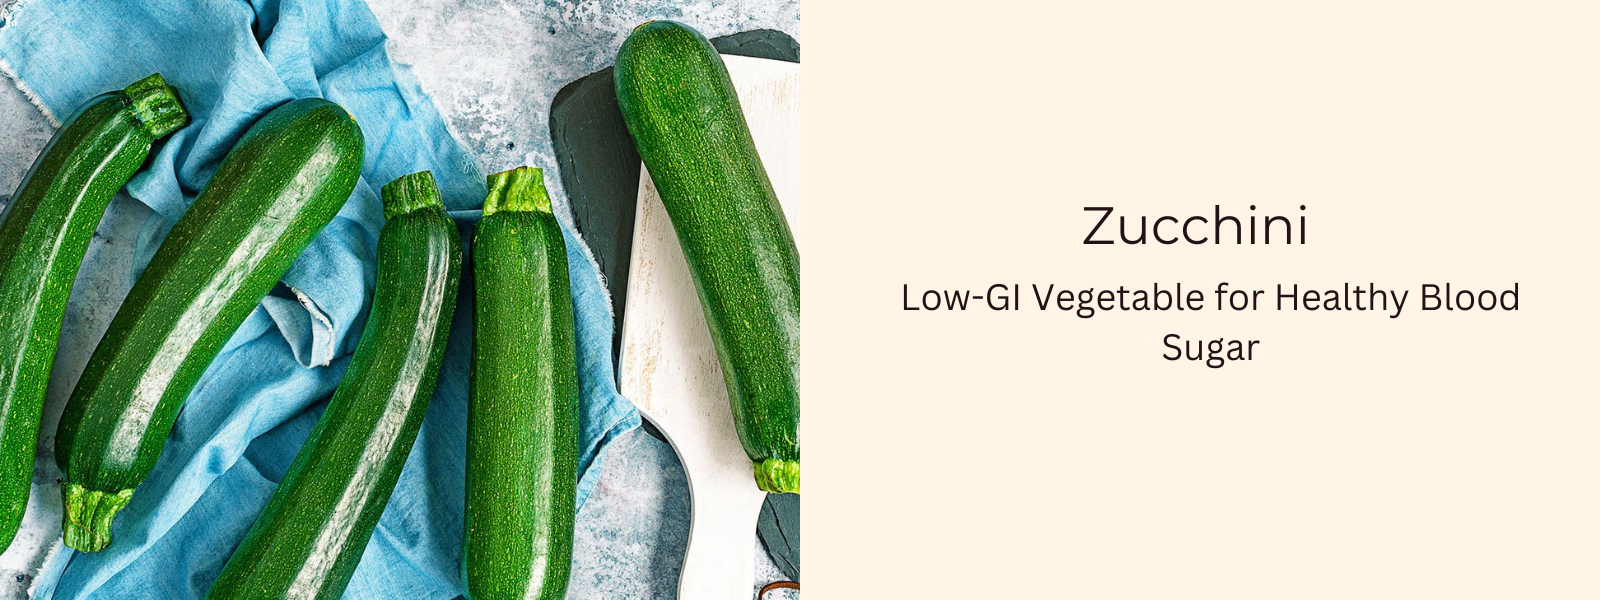 Zucchini Delight: Low-GI Vegetable for Healthy Blood Sugar